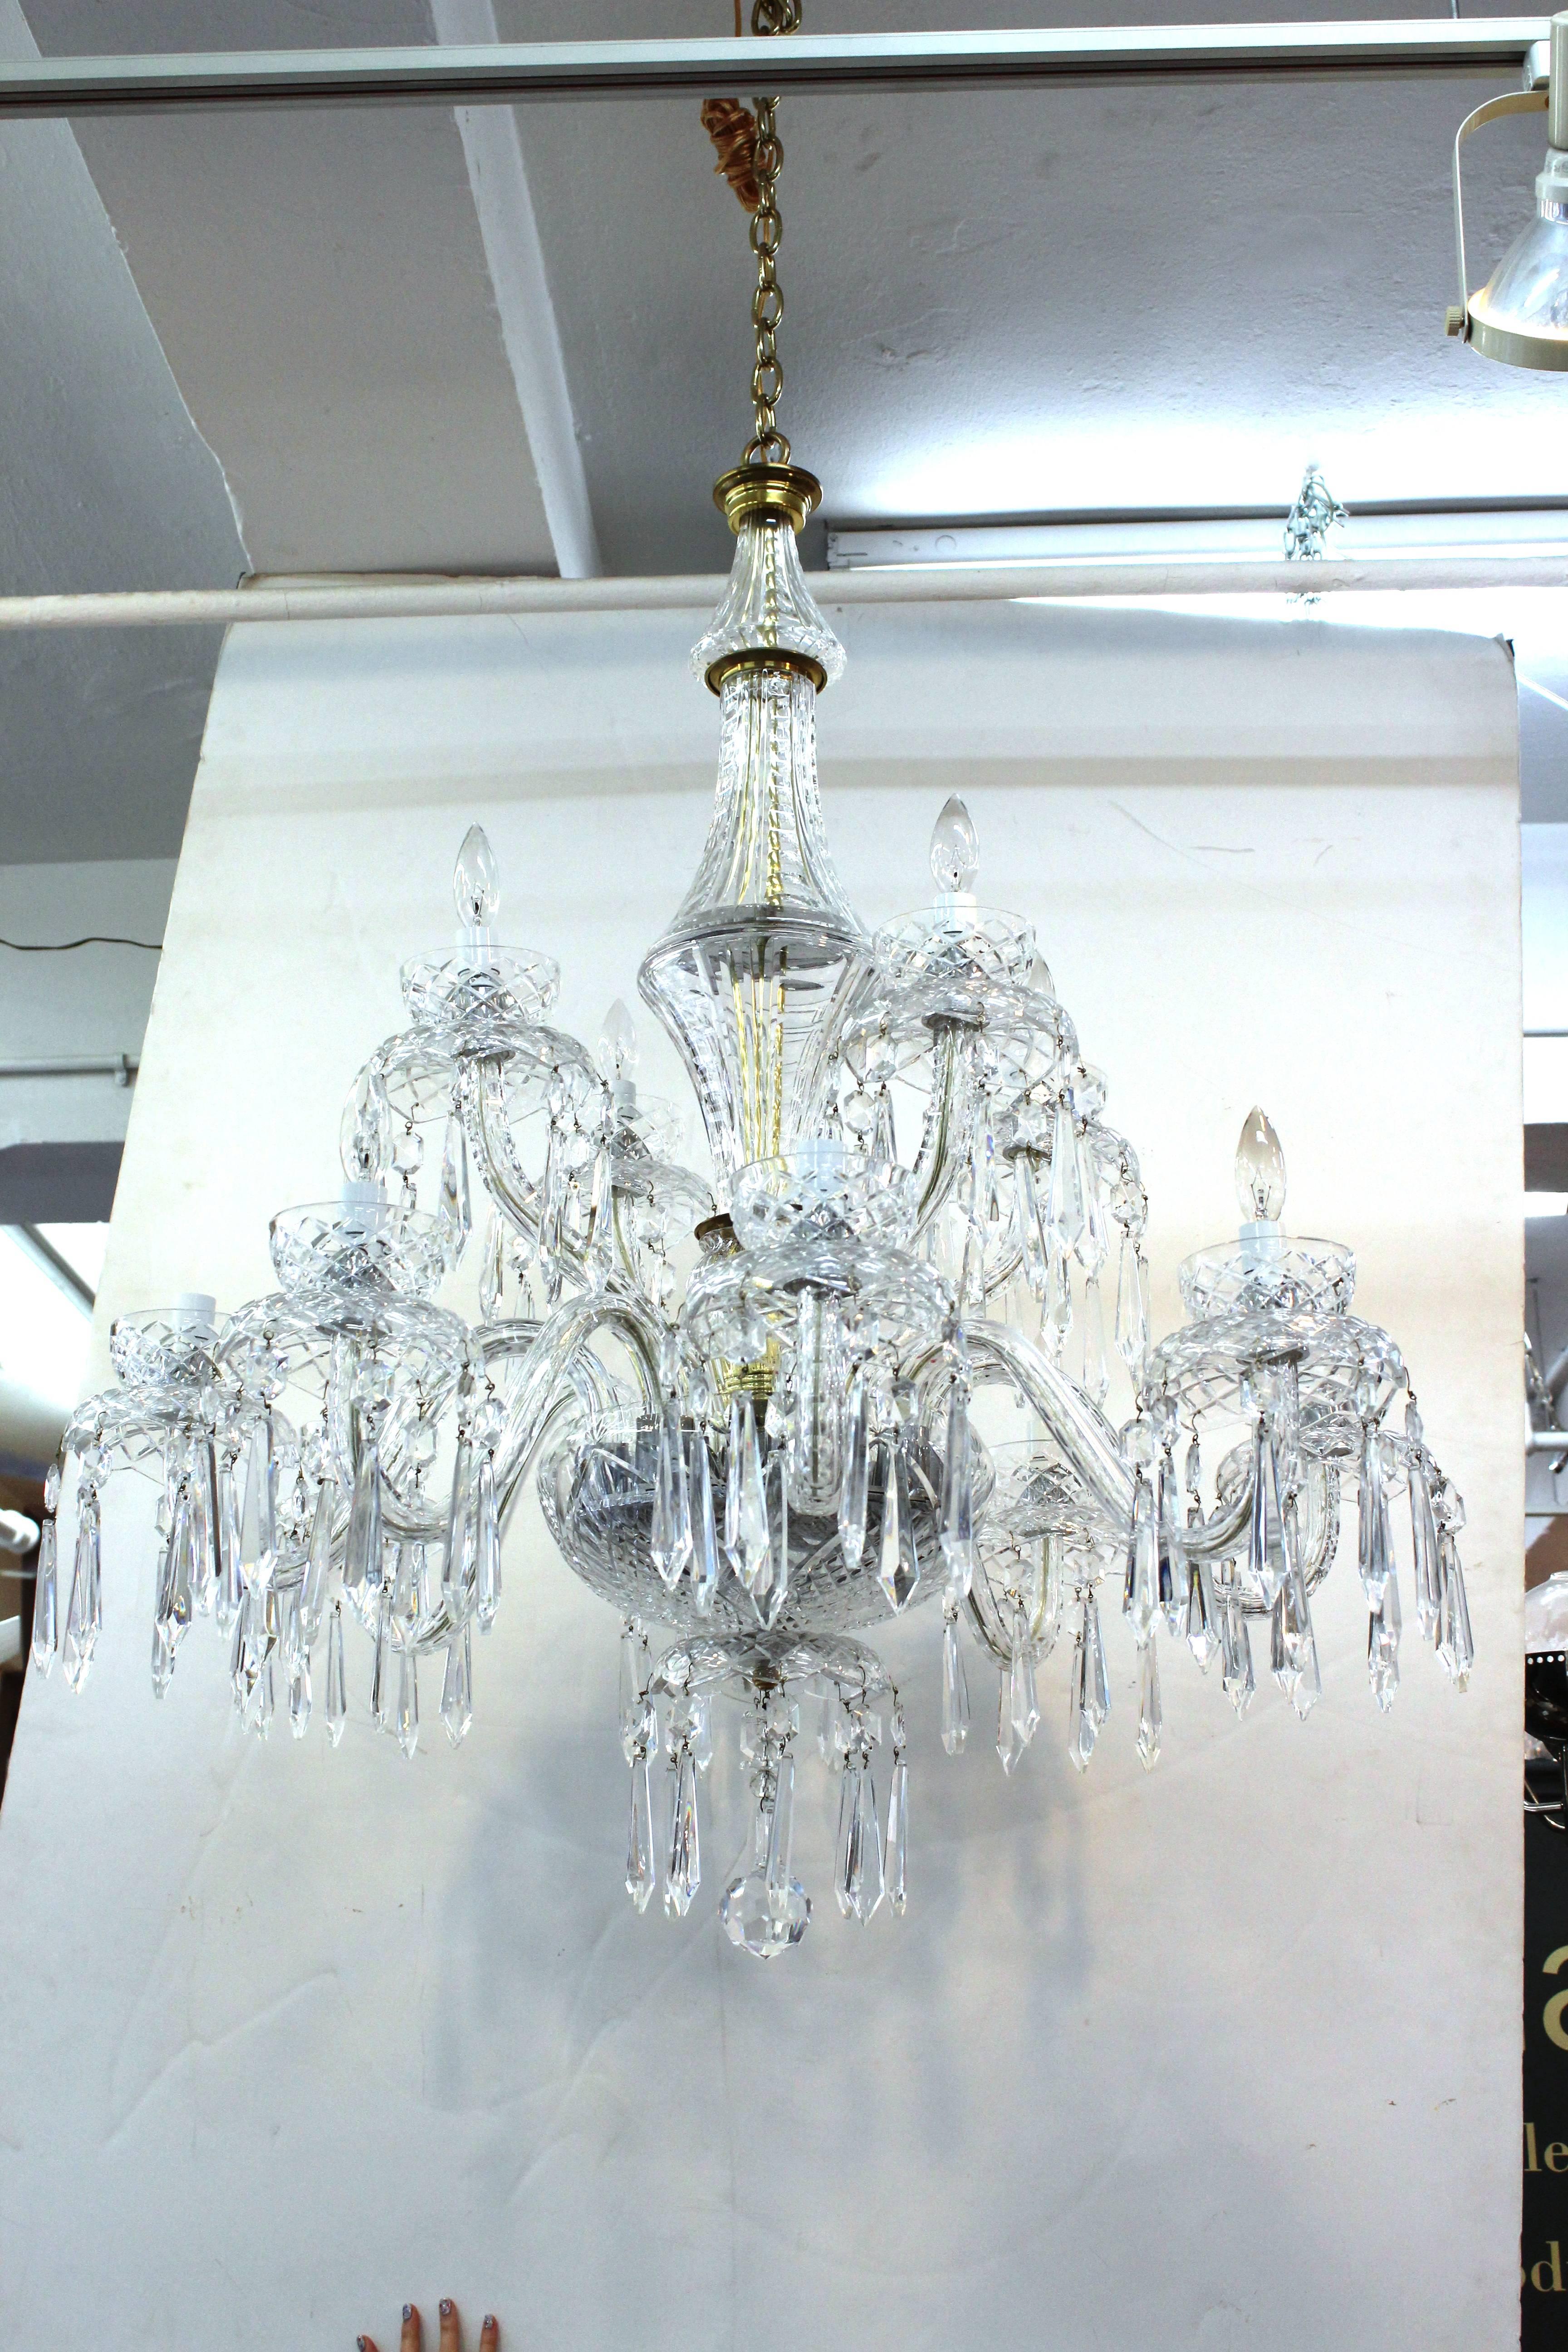 Crystal chandelier by Waterford. Features an intricately cut crystal body and scrolled arms. Includes levels of long cascading cute crystal droplets. Wear appropriate to age and use. The chandelier is in good condition.